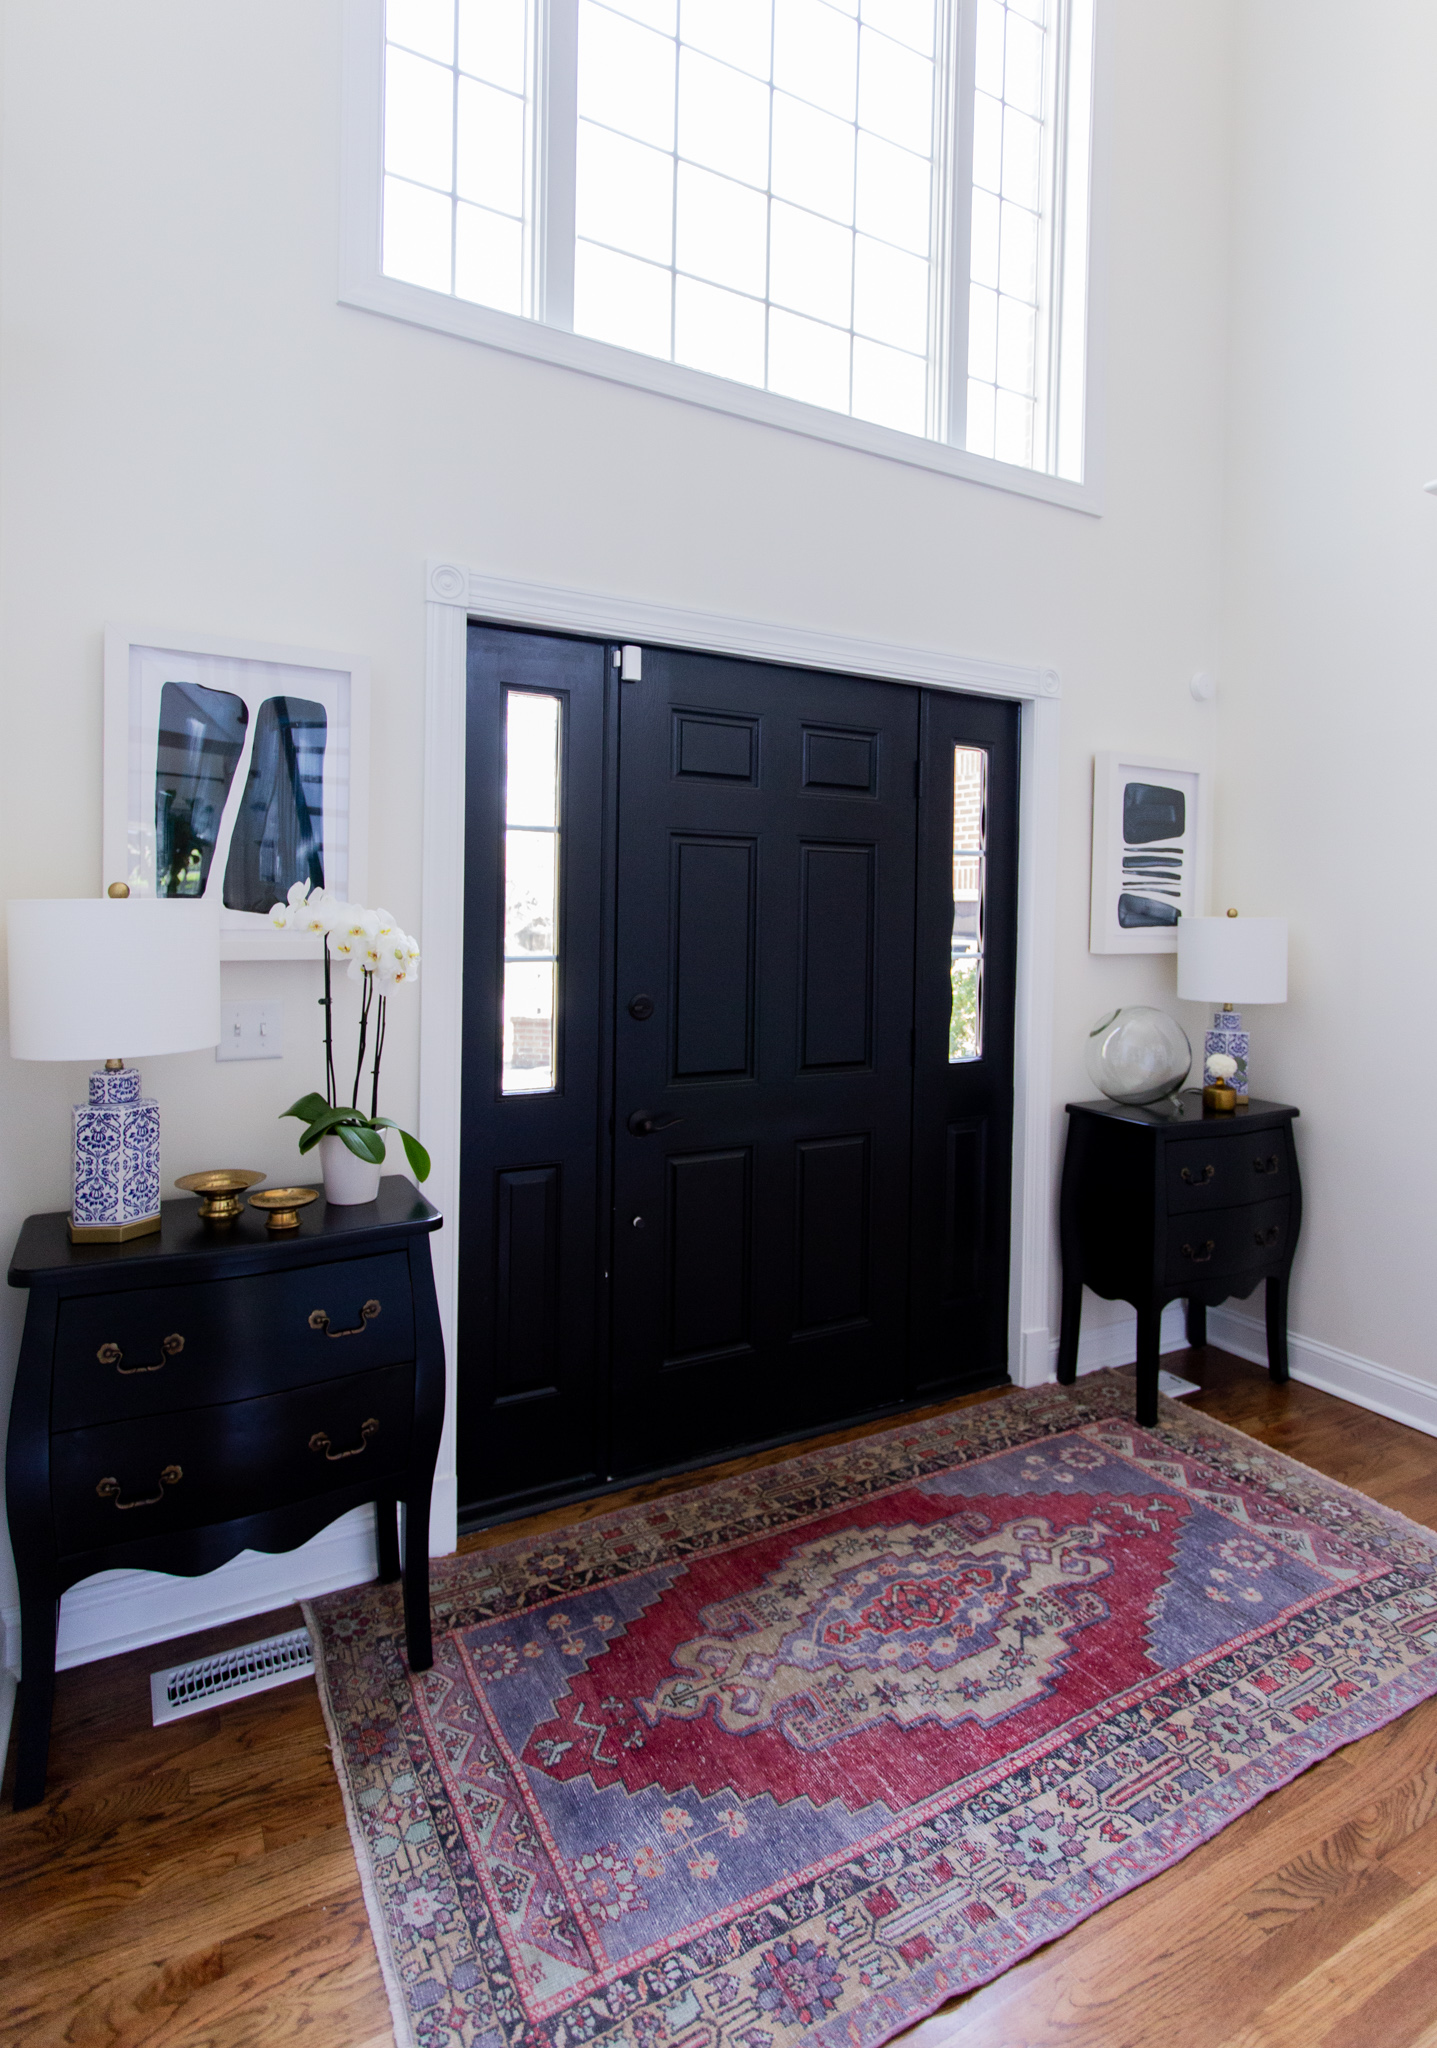 Arhaus Lighting by popular Ohio life and style blog, Coffee Beans and Bobby Pins: image of a entry way decorated with a Arhaus poppy large chandelier, Arhaus rug, Arhaus black lines framed print 1, Arhaus bombay small chest, and Arhaus lotus bud vase.